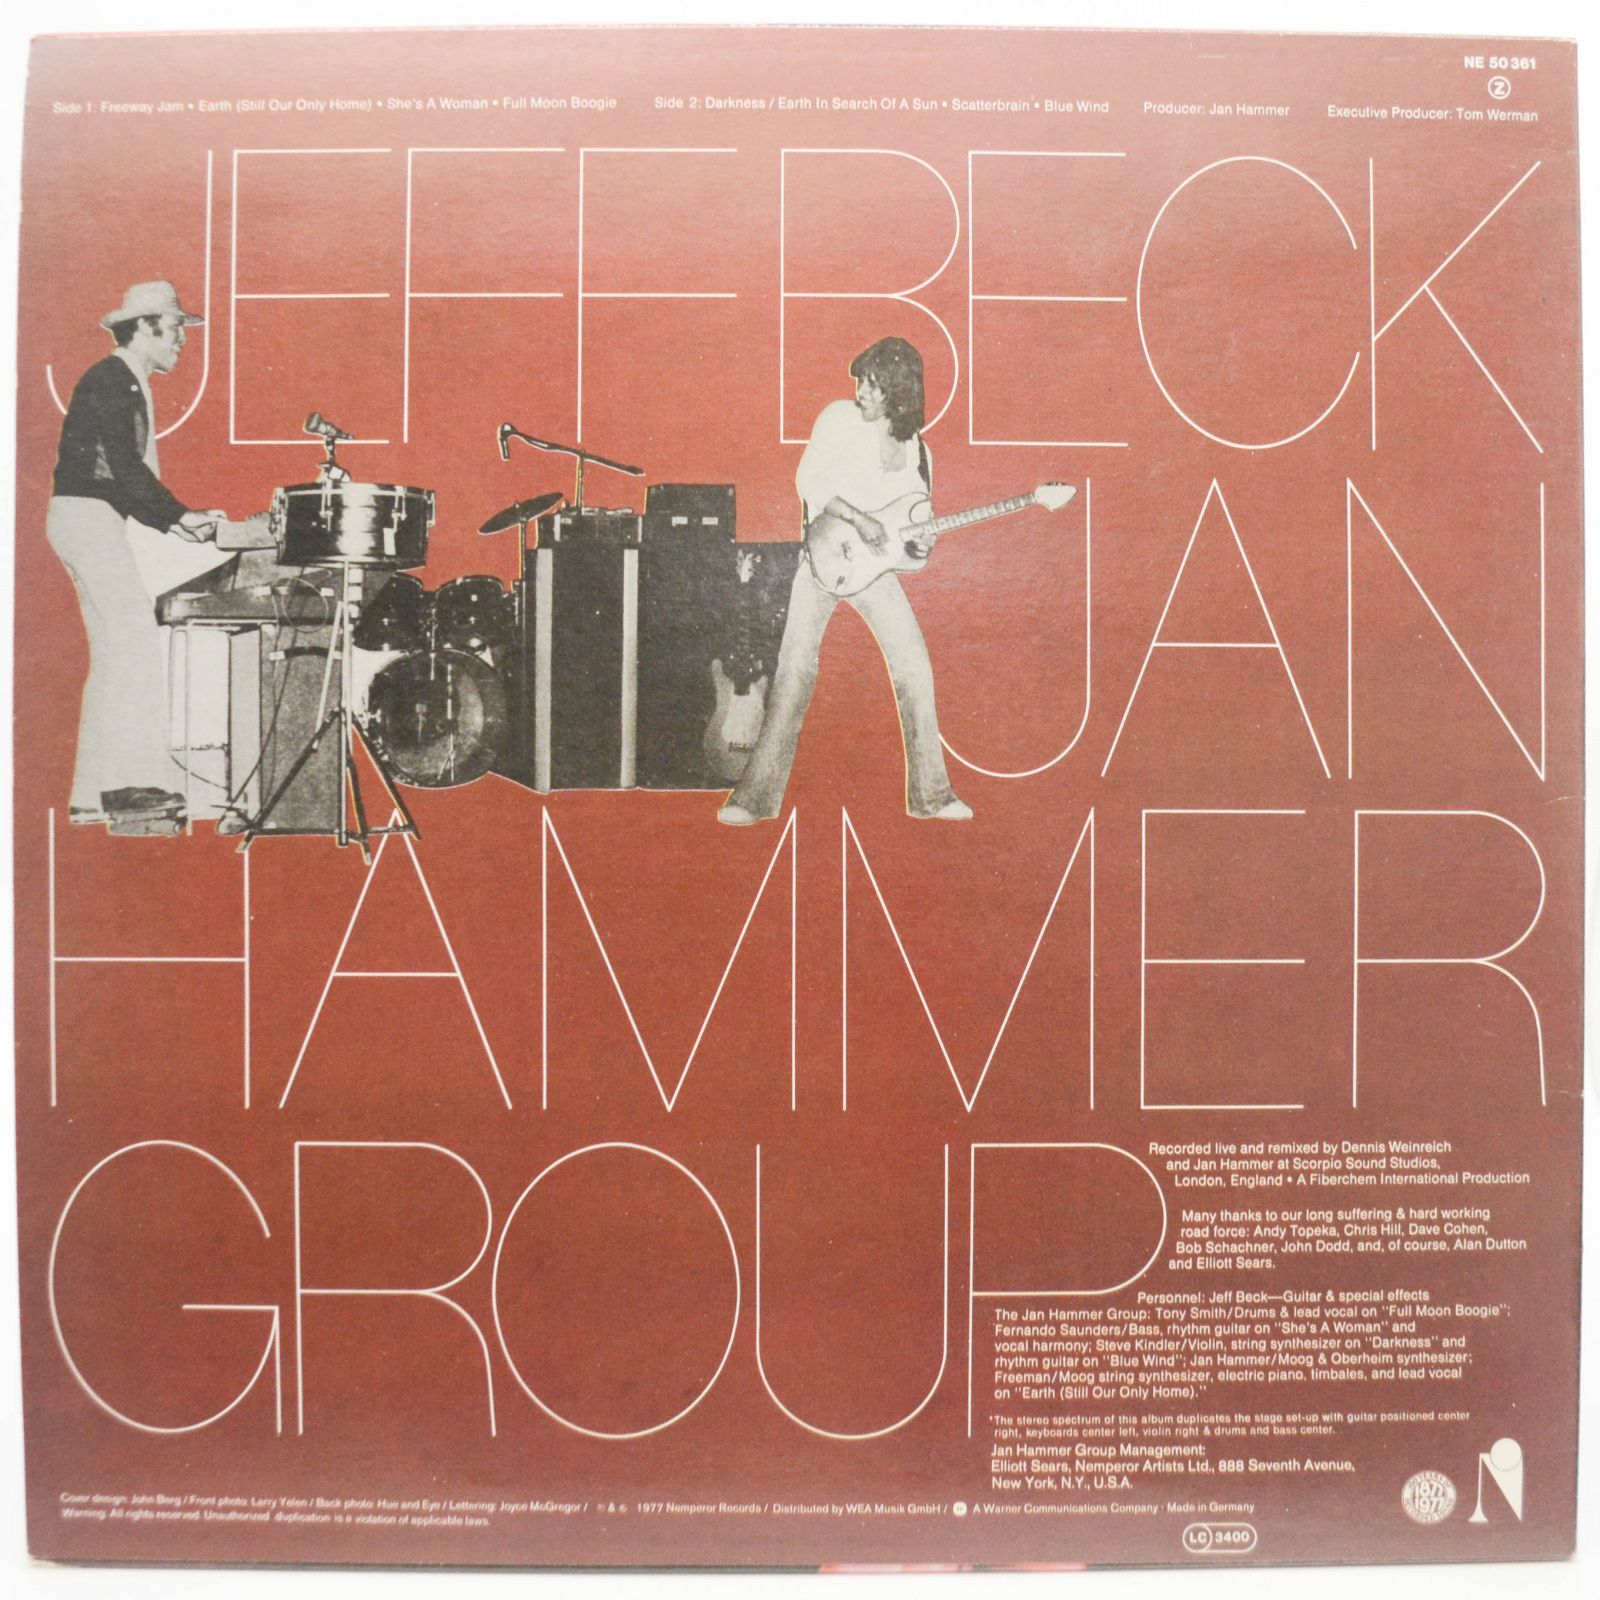 Jeff Beck With The Jan Hammer Group — Live, 1977